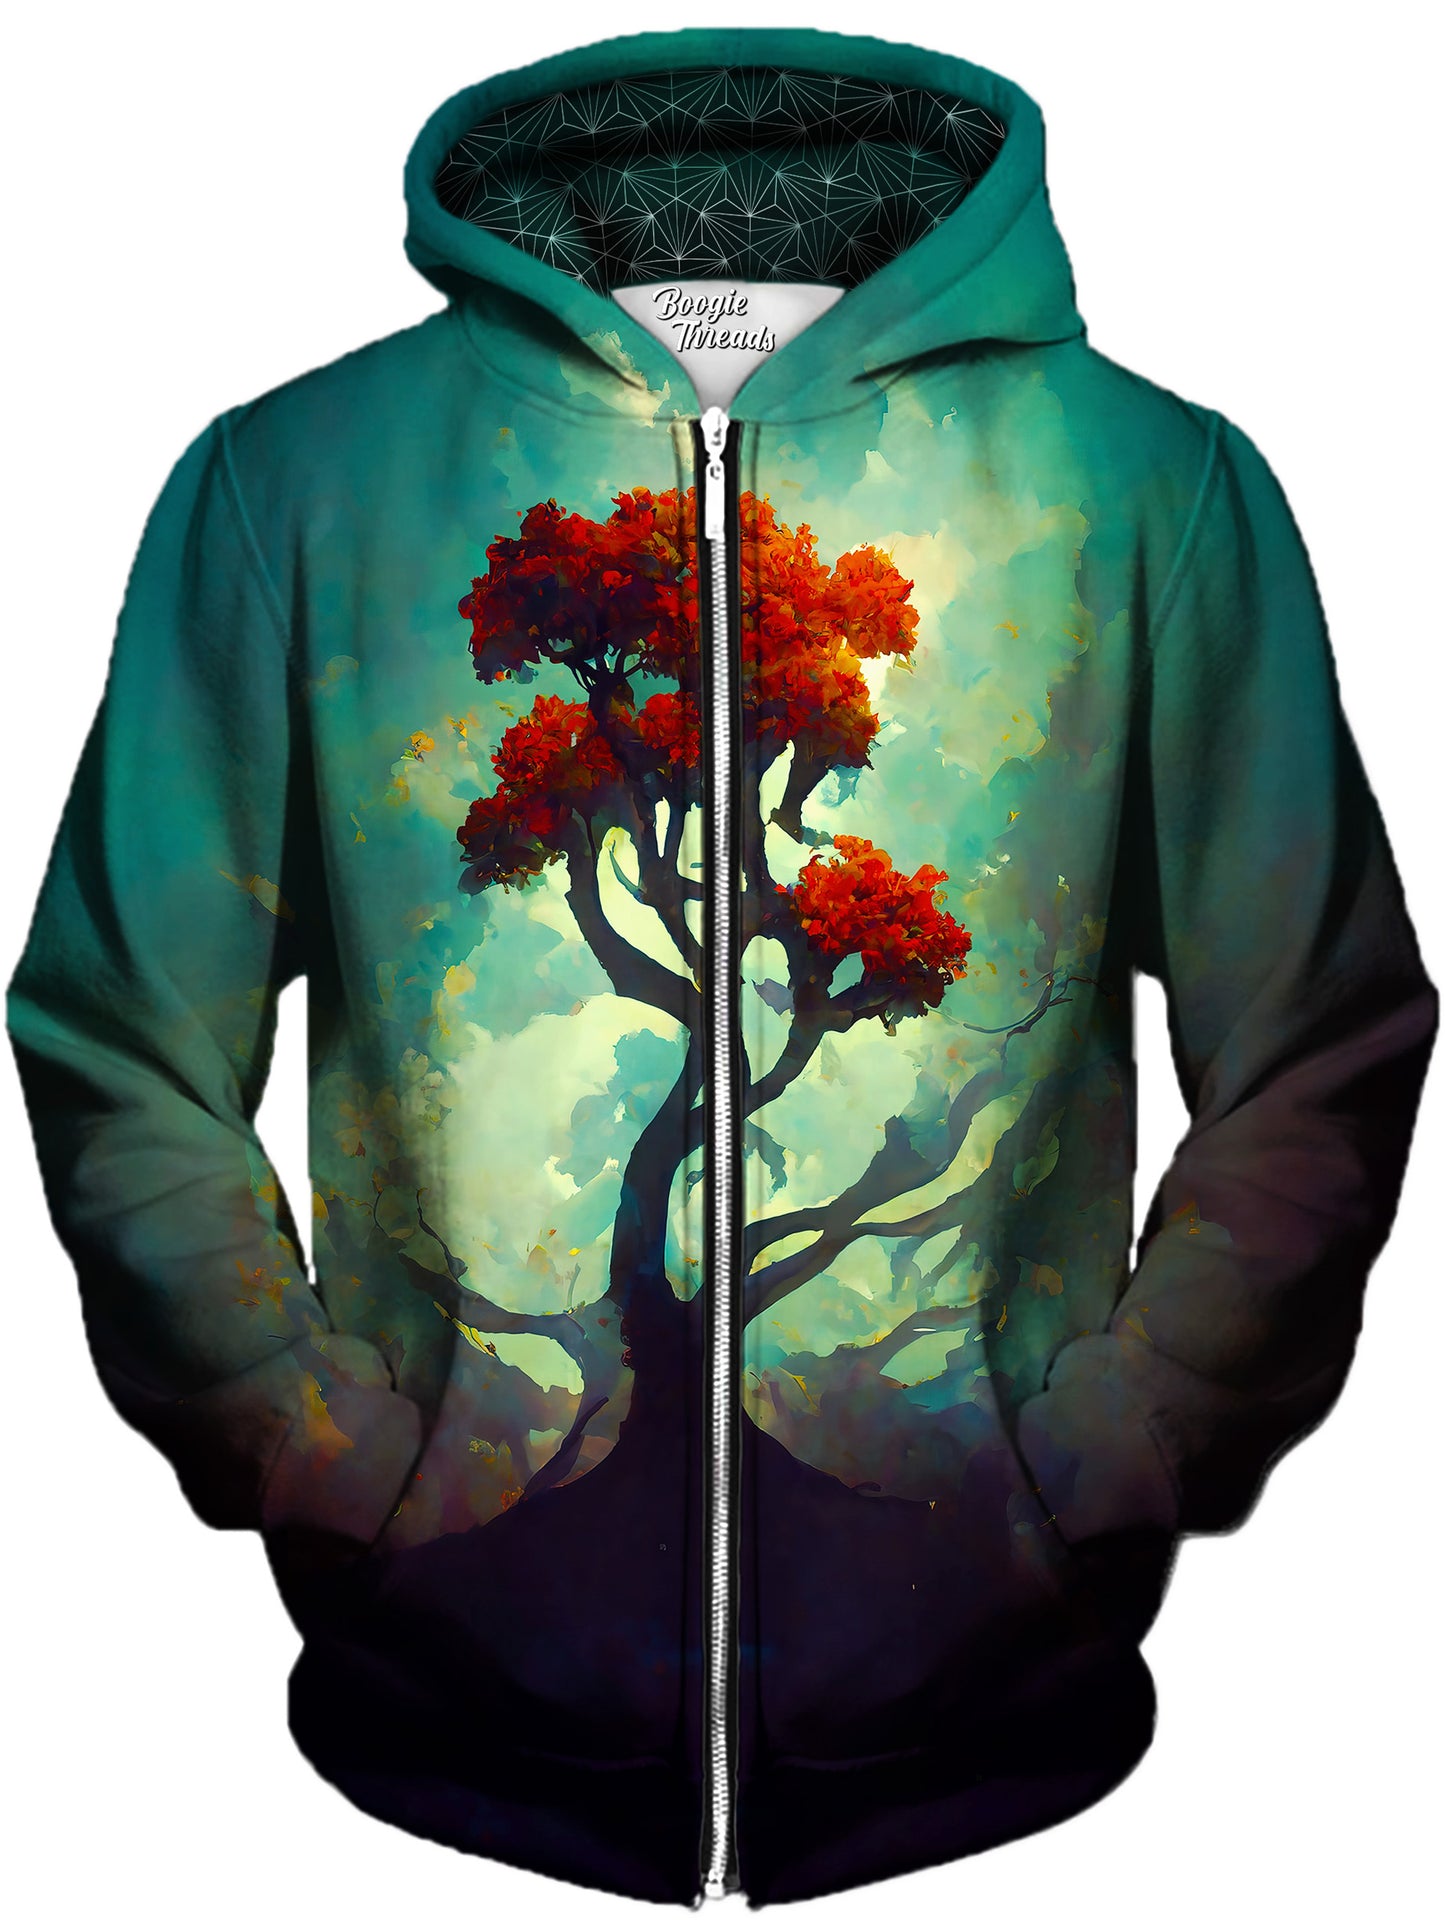 Ruthless Change Unisex Zip-Up Hoodie, Gratefully Dyed, | iEDM